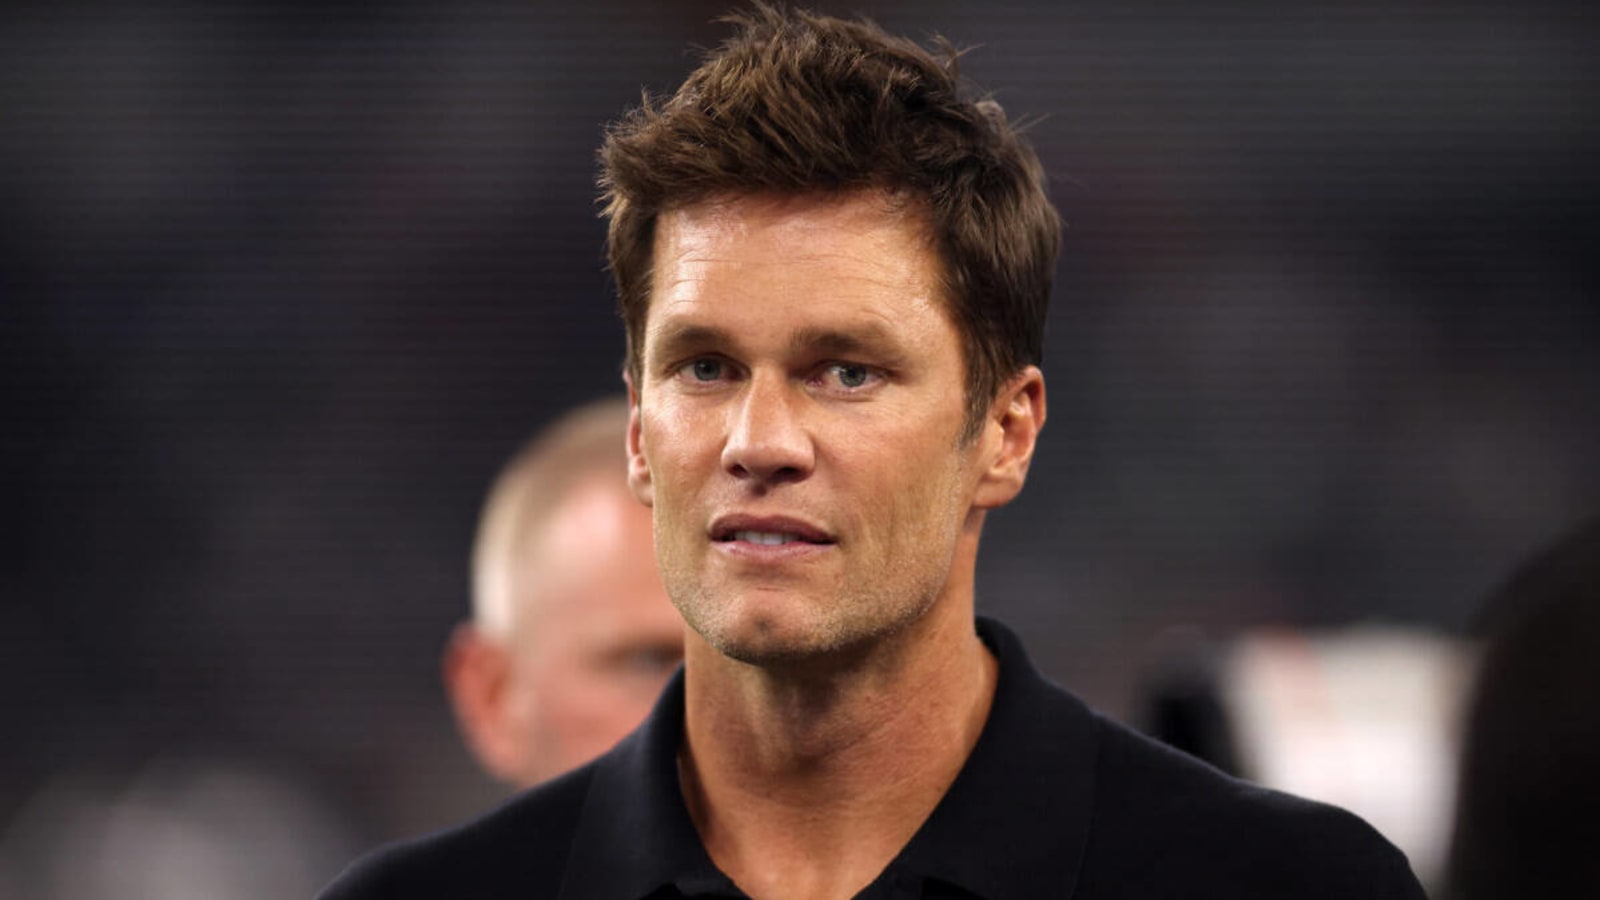 Patriots legend Tom Brady has blunt admission on whether he would do another roast